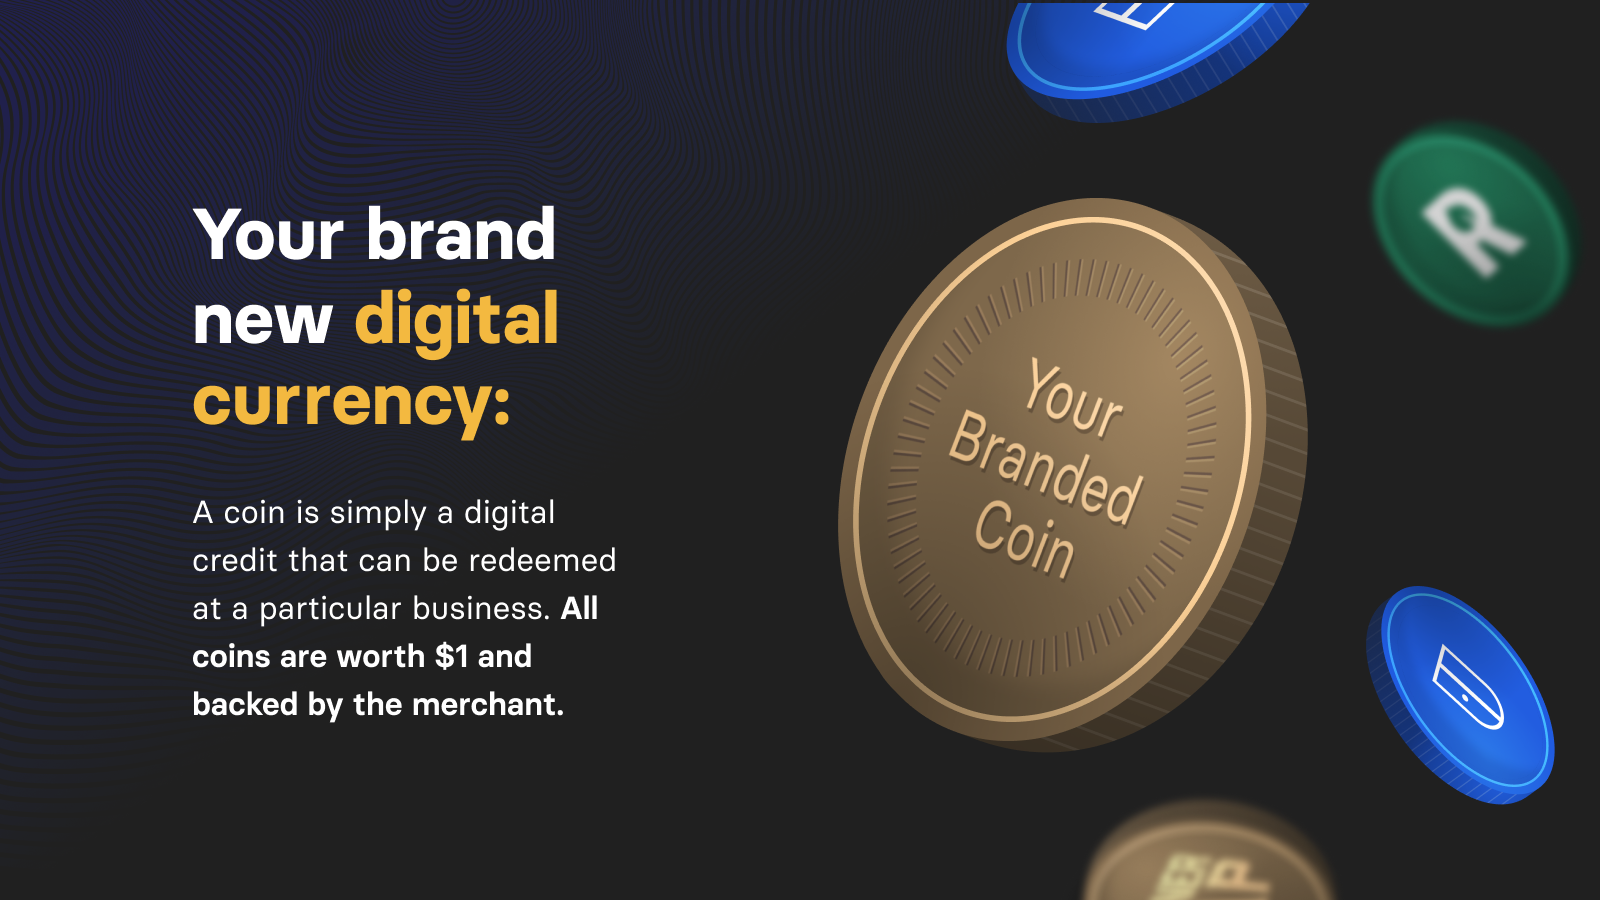 Your brand new digital currency.